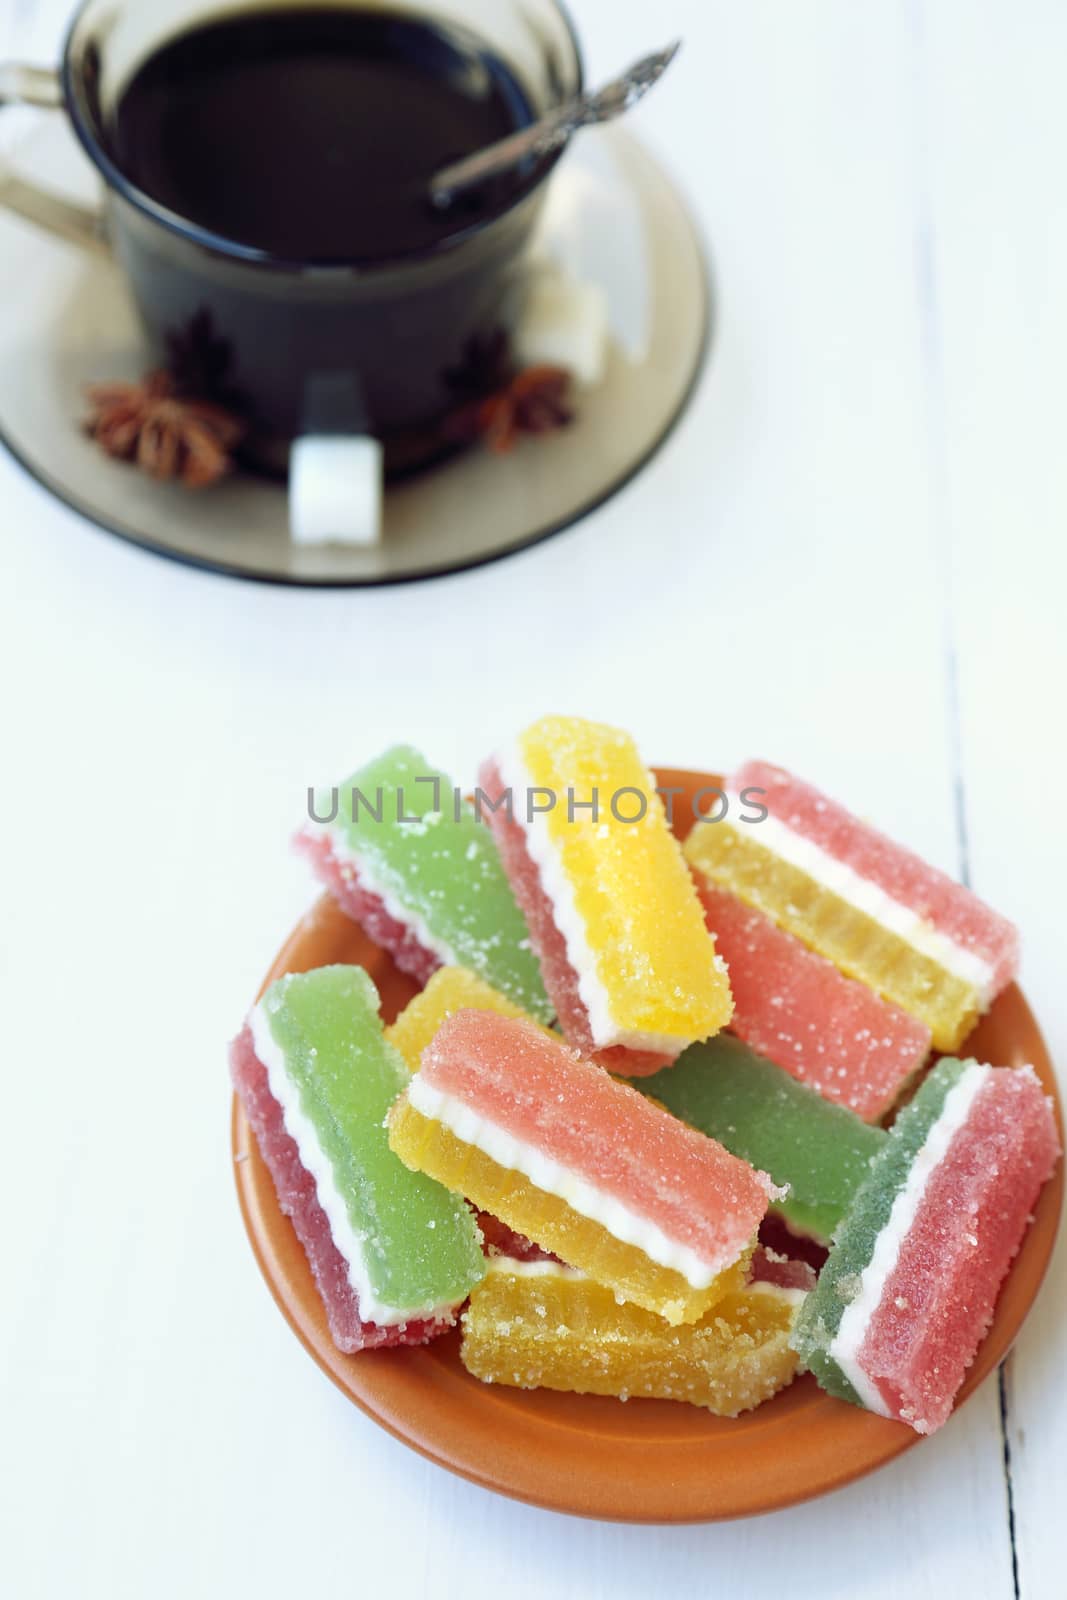 fruit jellies are in a saucer, near a cup with tea